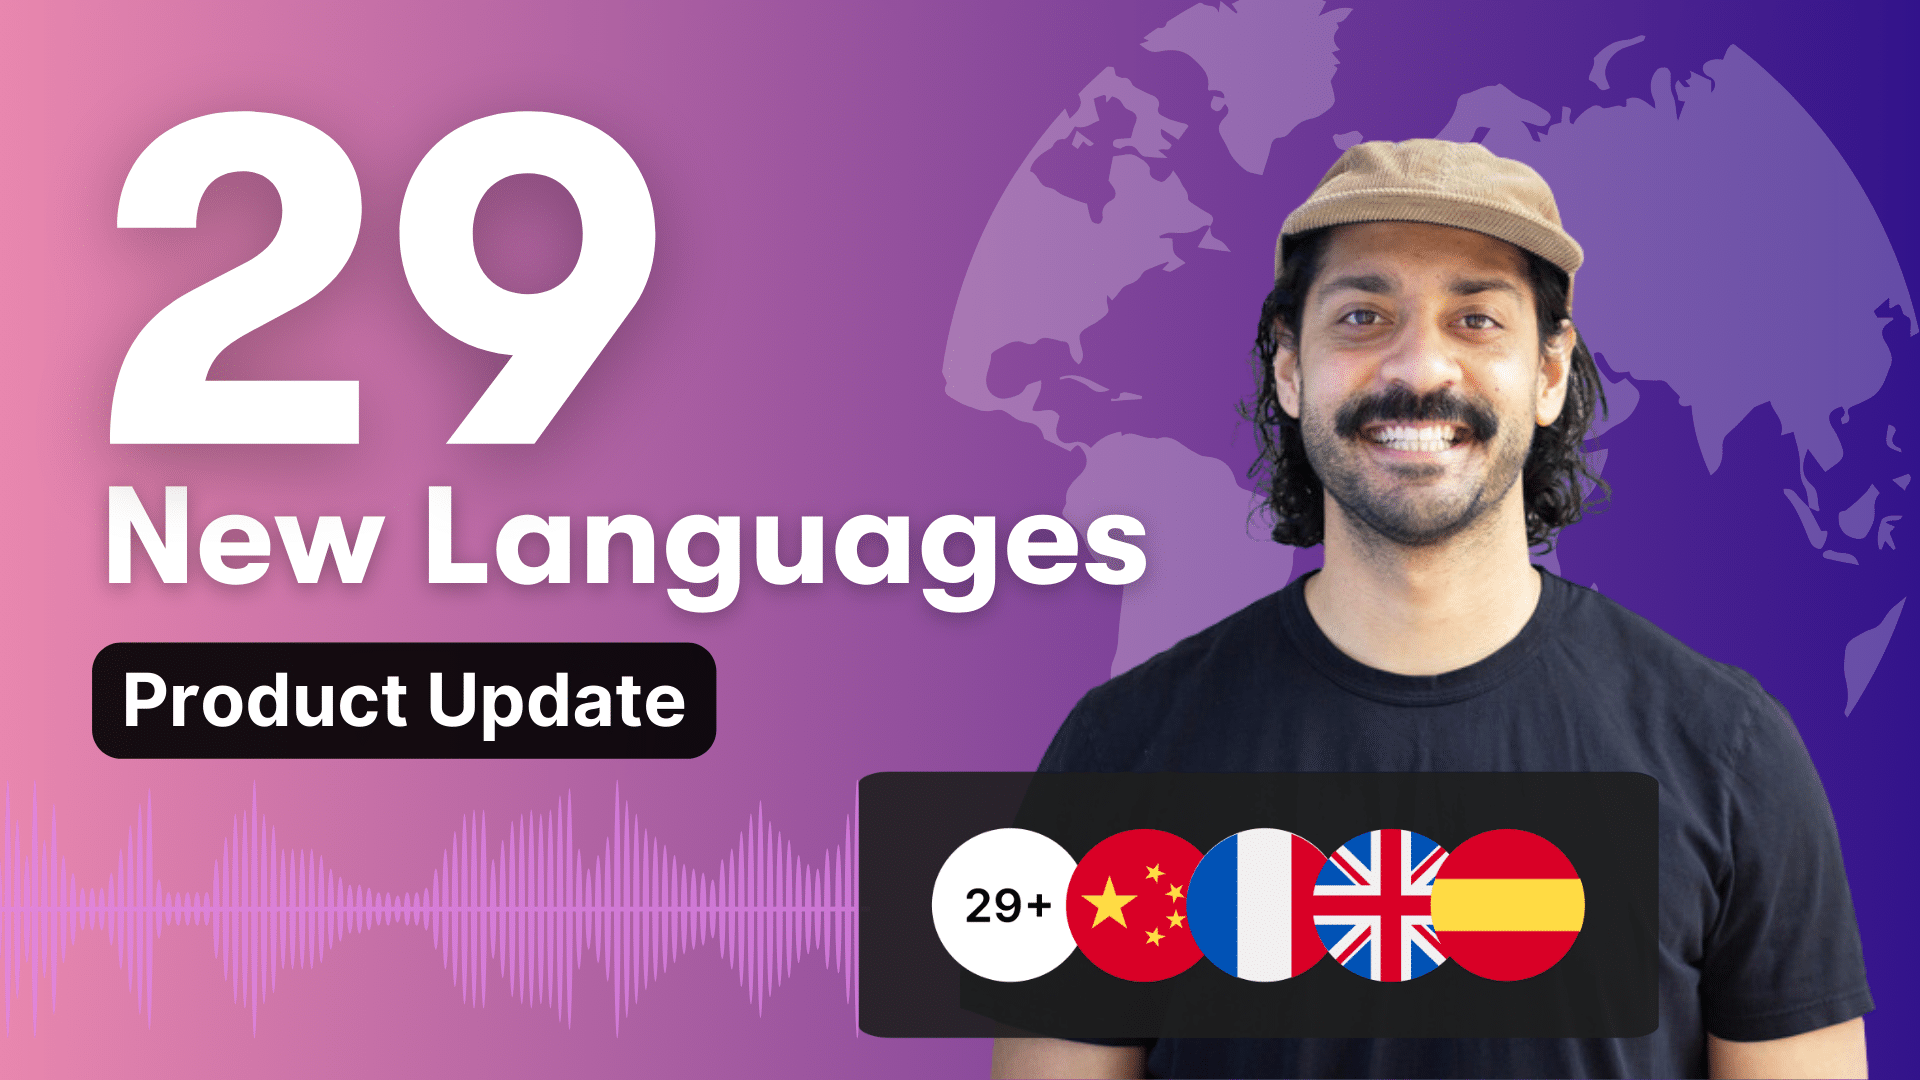 29 New Languages - Pictory Product Updates